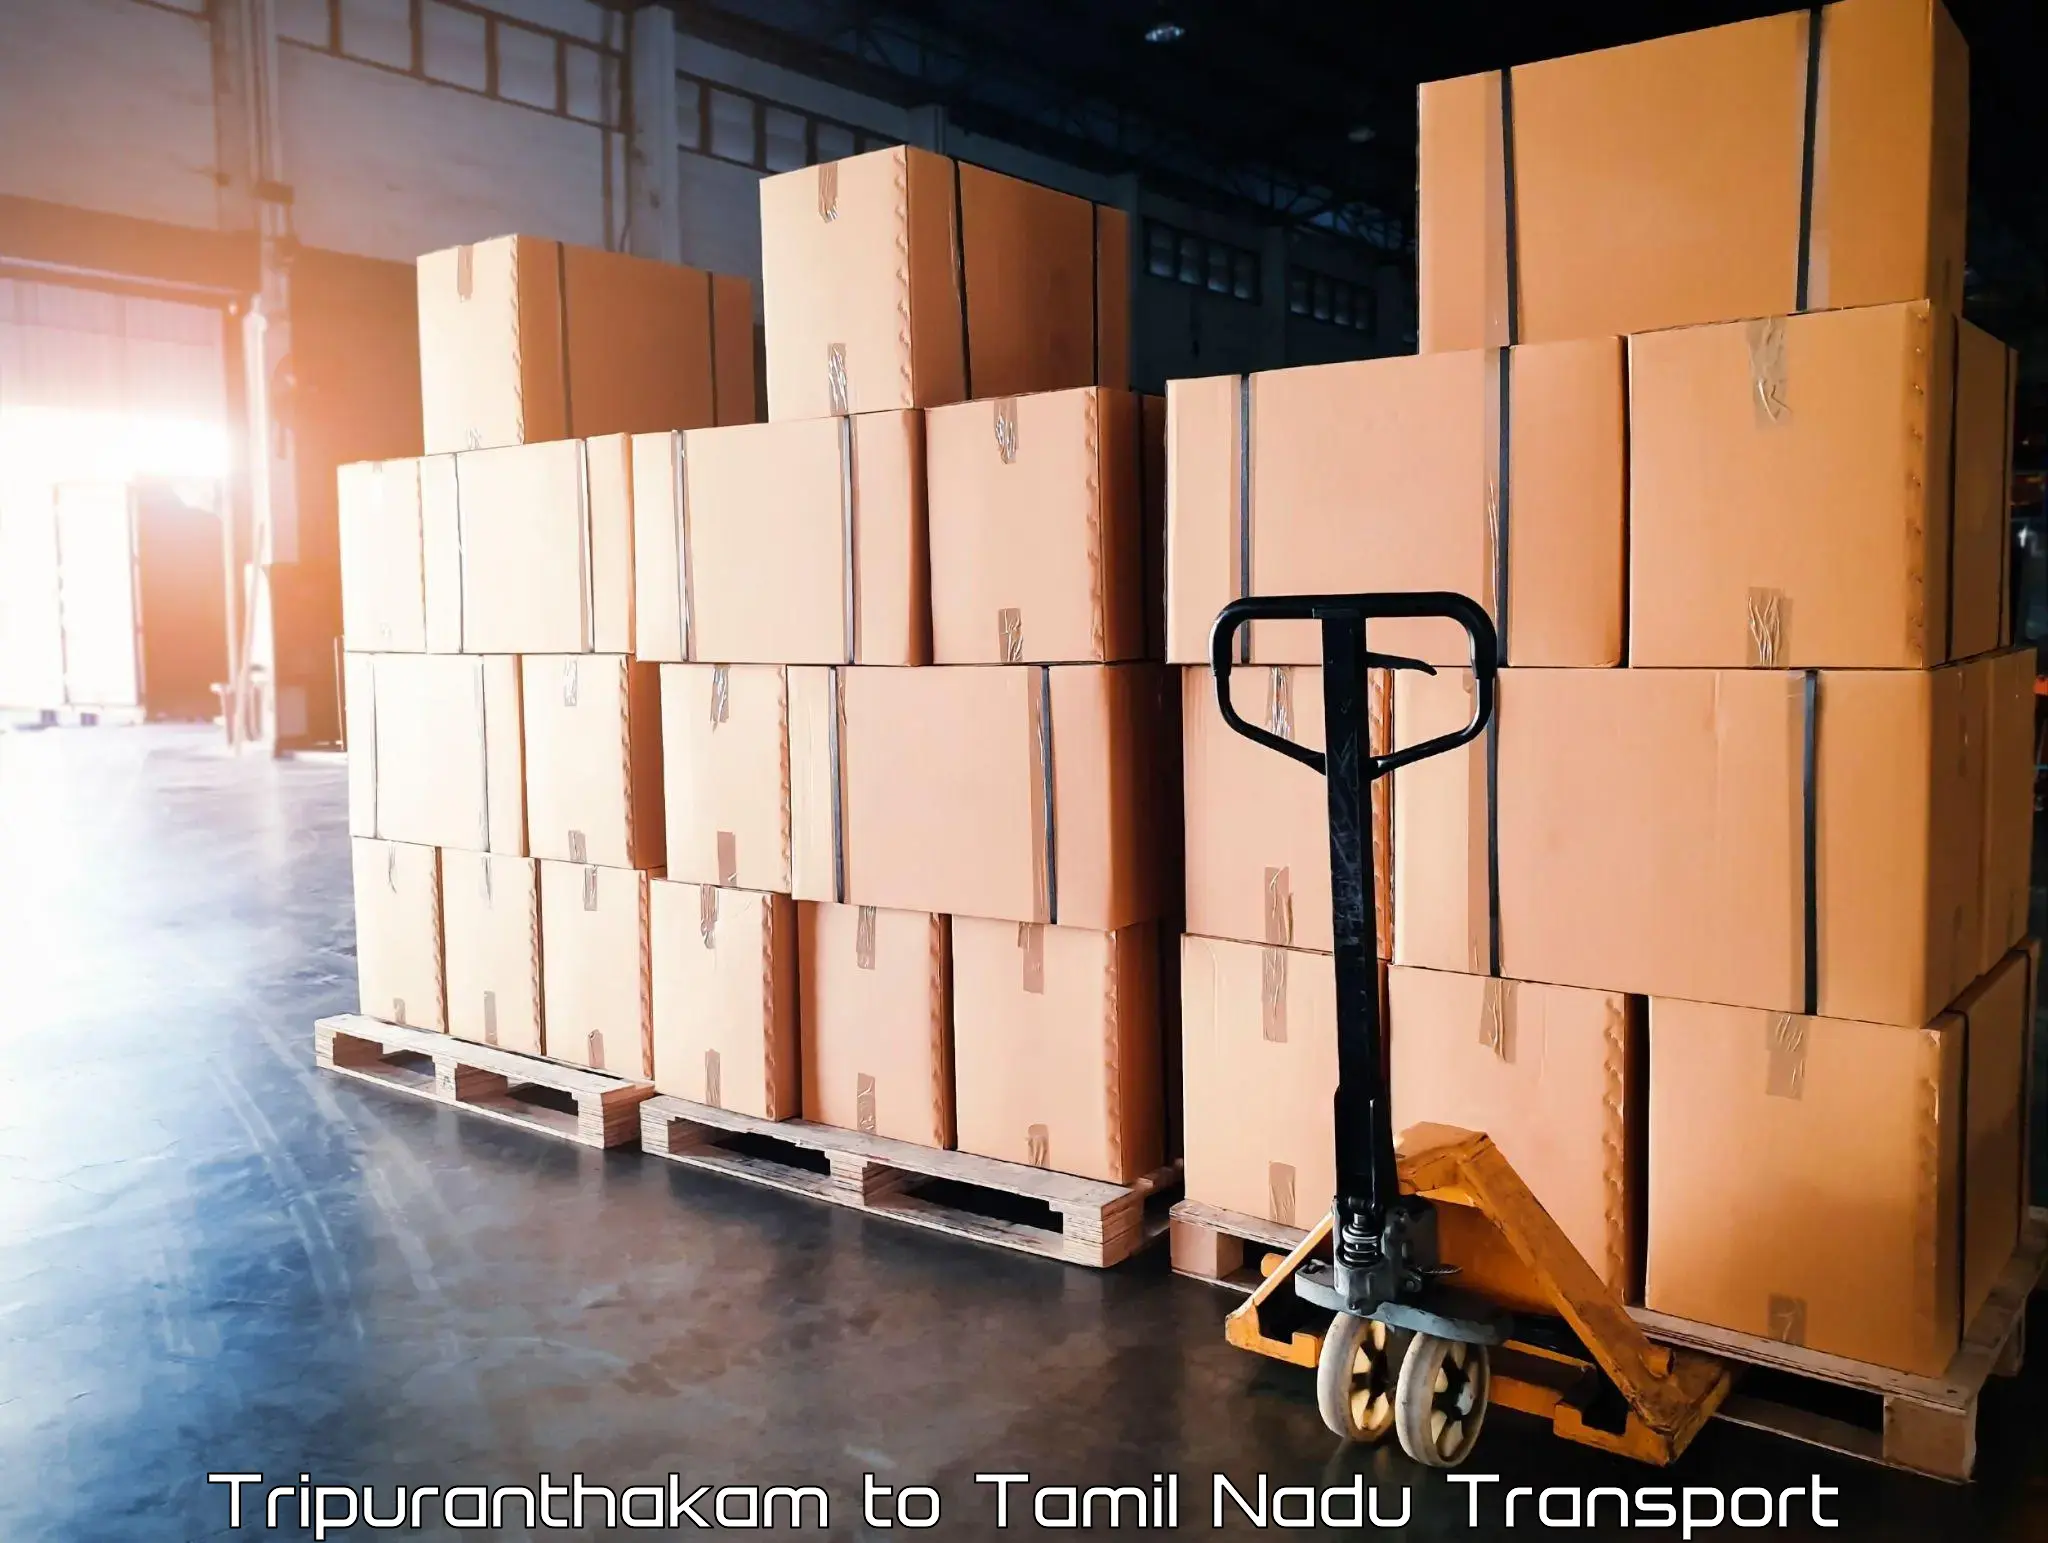 Road transport services in Tripuranthakam to Cuddalore